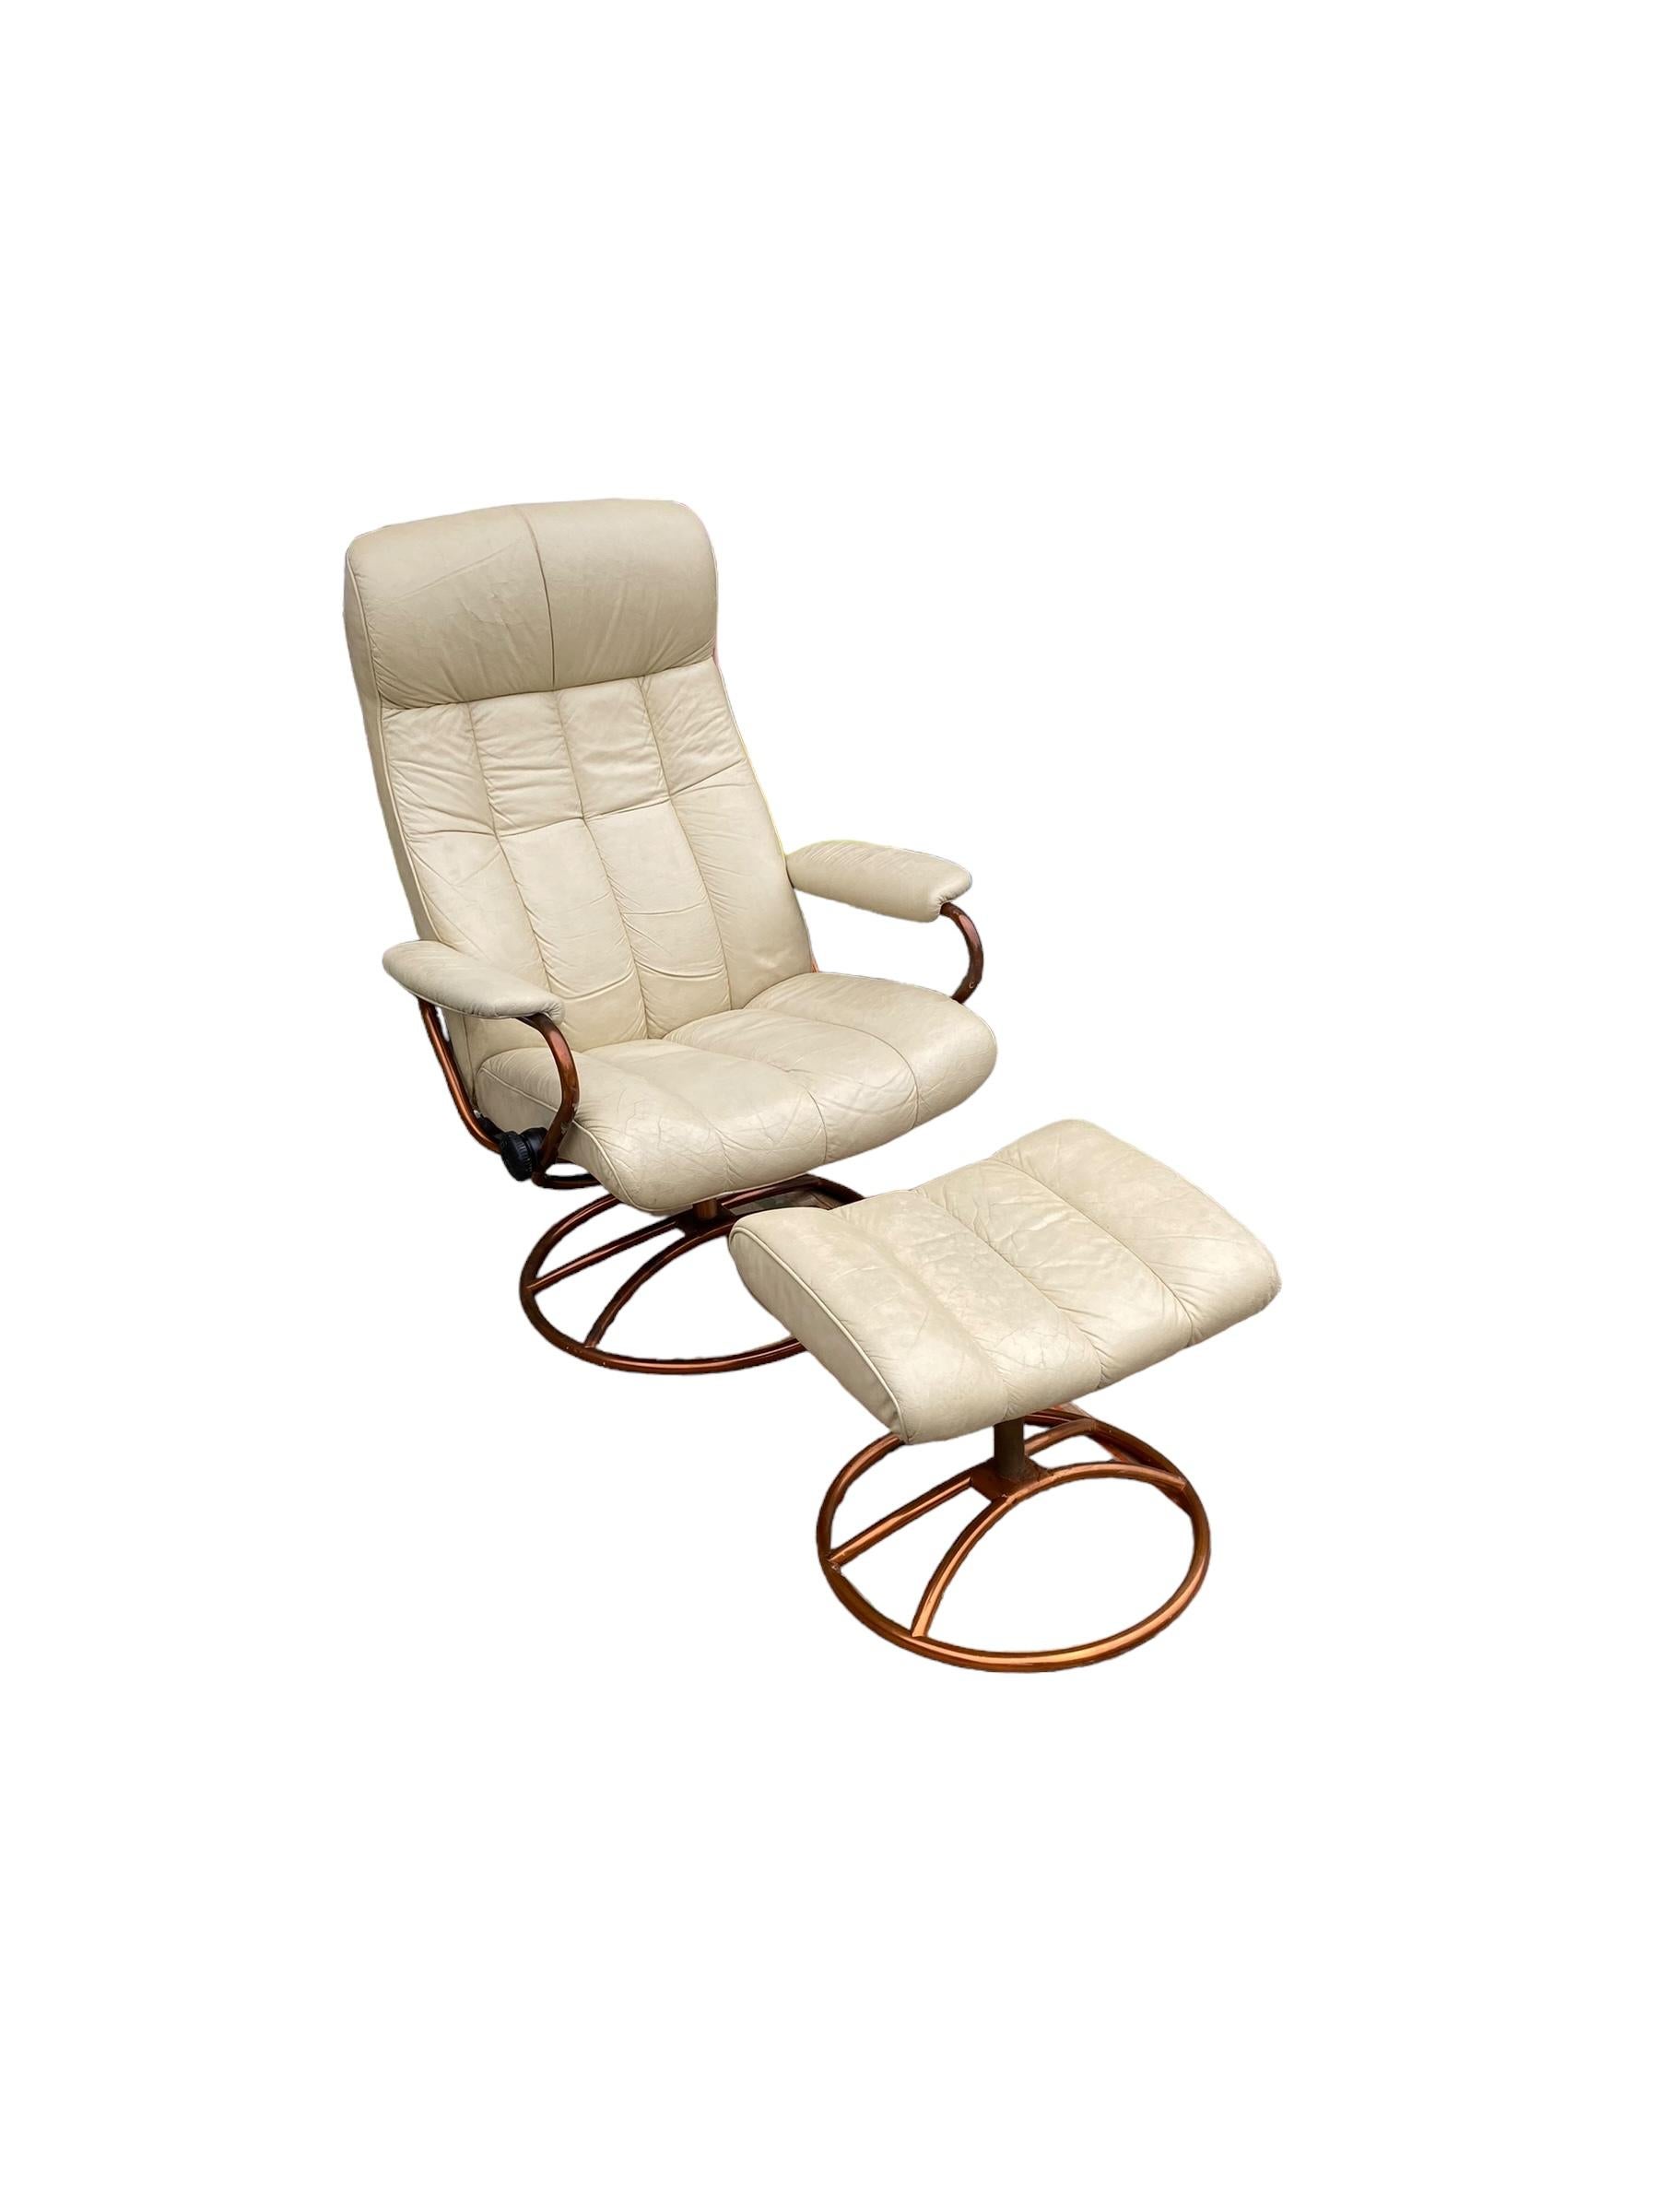 Post Modern Stressless Lounge Chair and Ottoman with copper frame For Sale 2